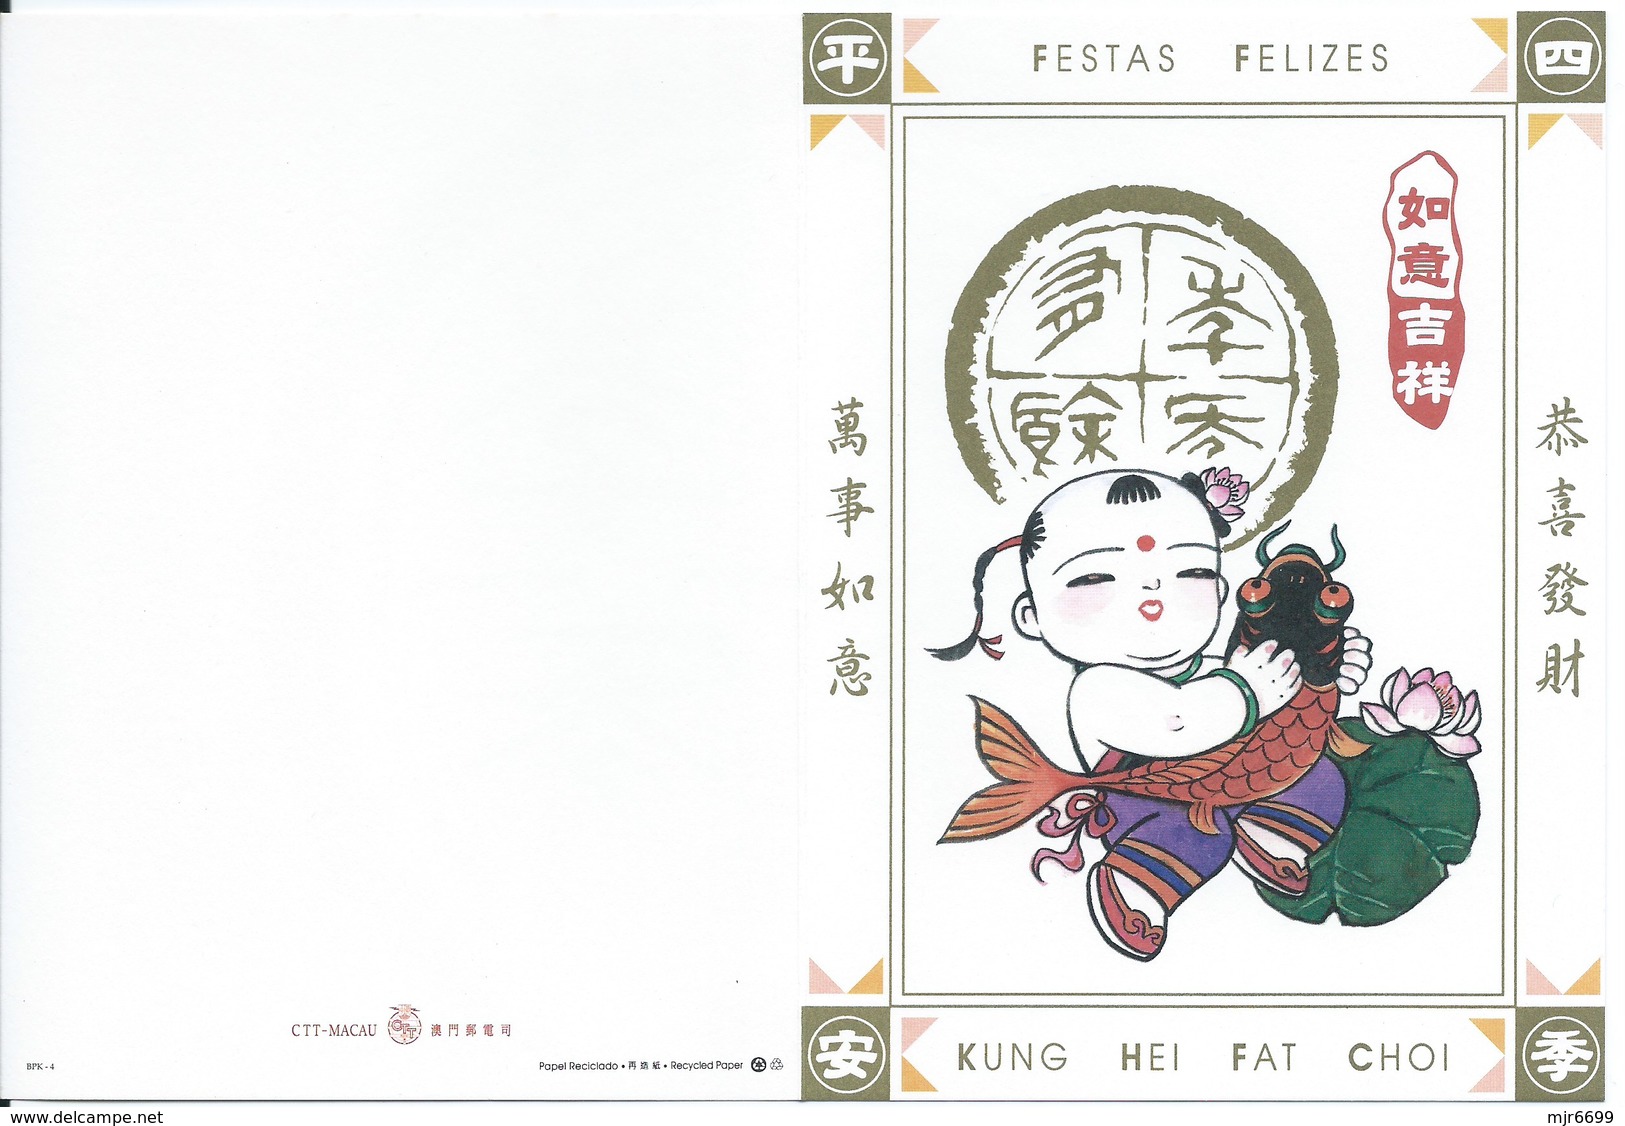 MACAU 1998 NEW YEAR GREETING CARD & POSTAGE PAID COVER, POST OFFICE CODE #BPK004 - Postal Stationery